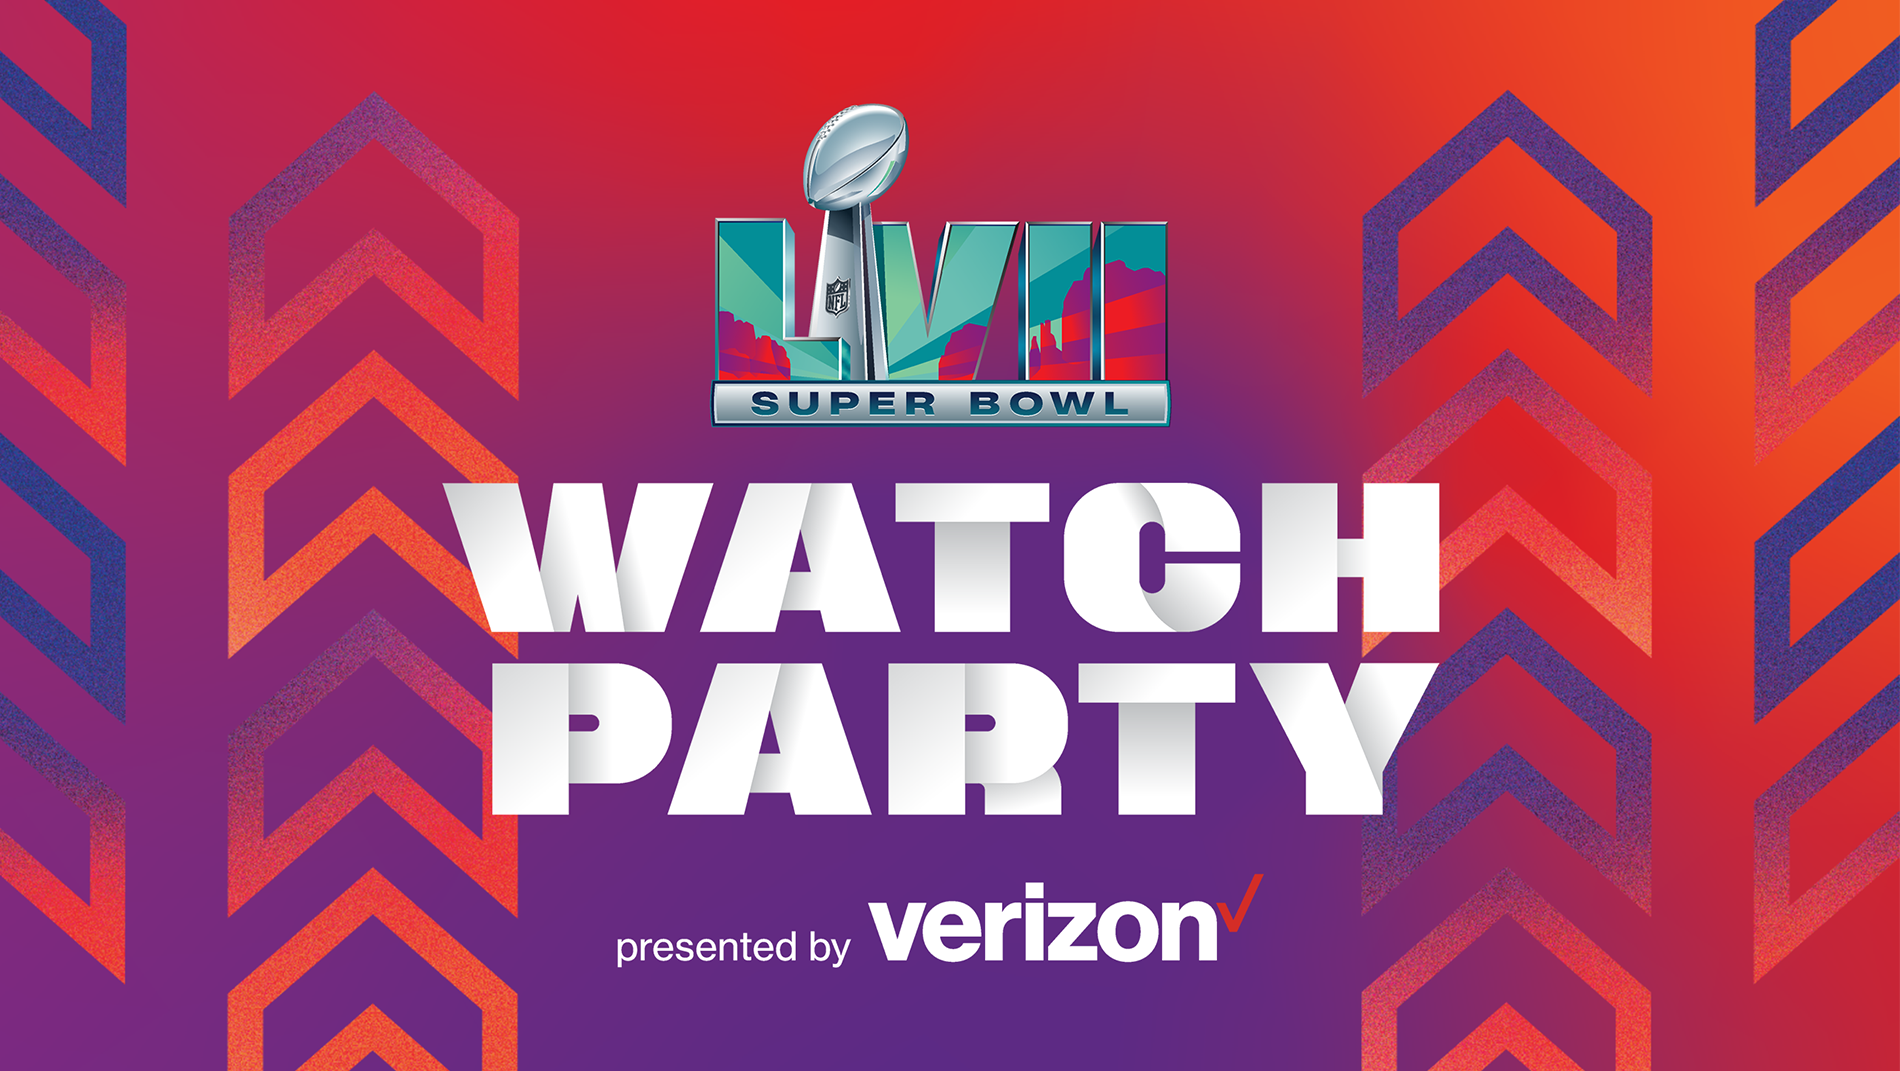 Host Committee and Verizon Partner on First-Ever Super Bowl Watch Party -  THE ARIZONA SUPER BOWL 2023 HOST COMMITTEE